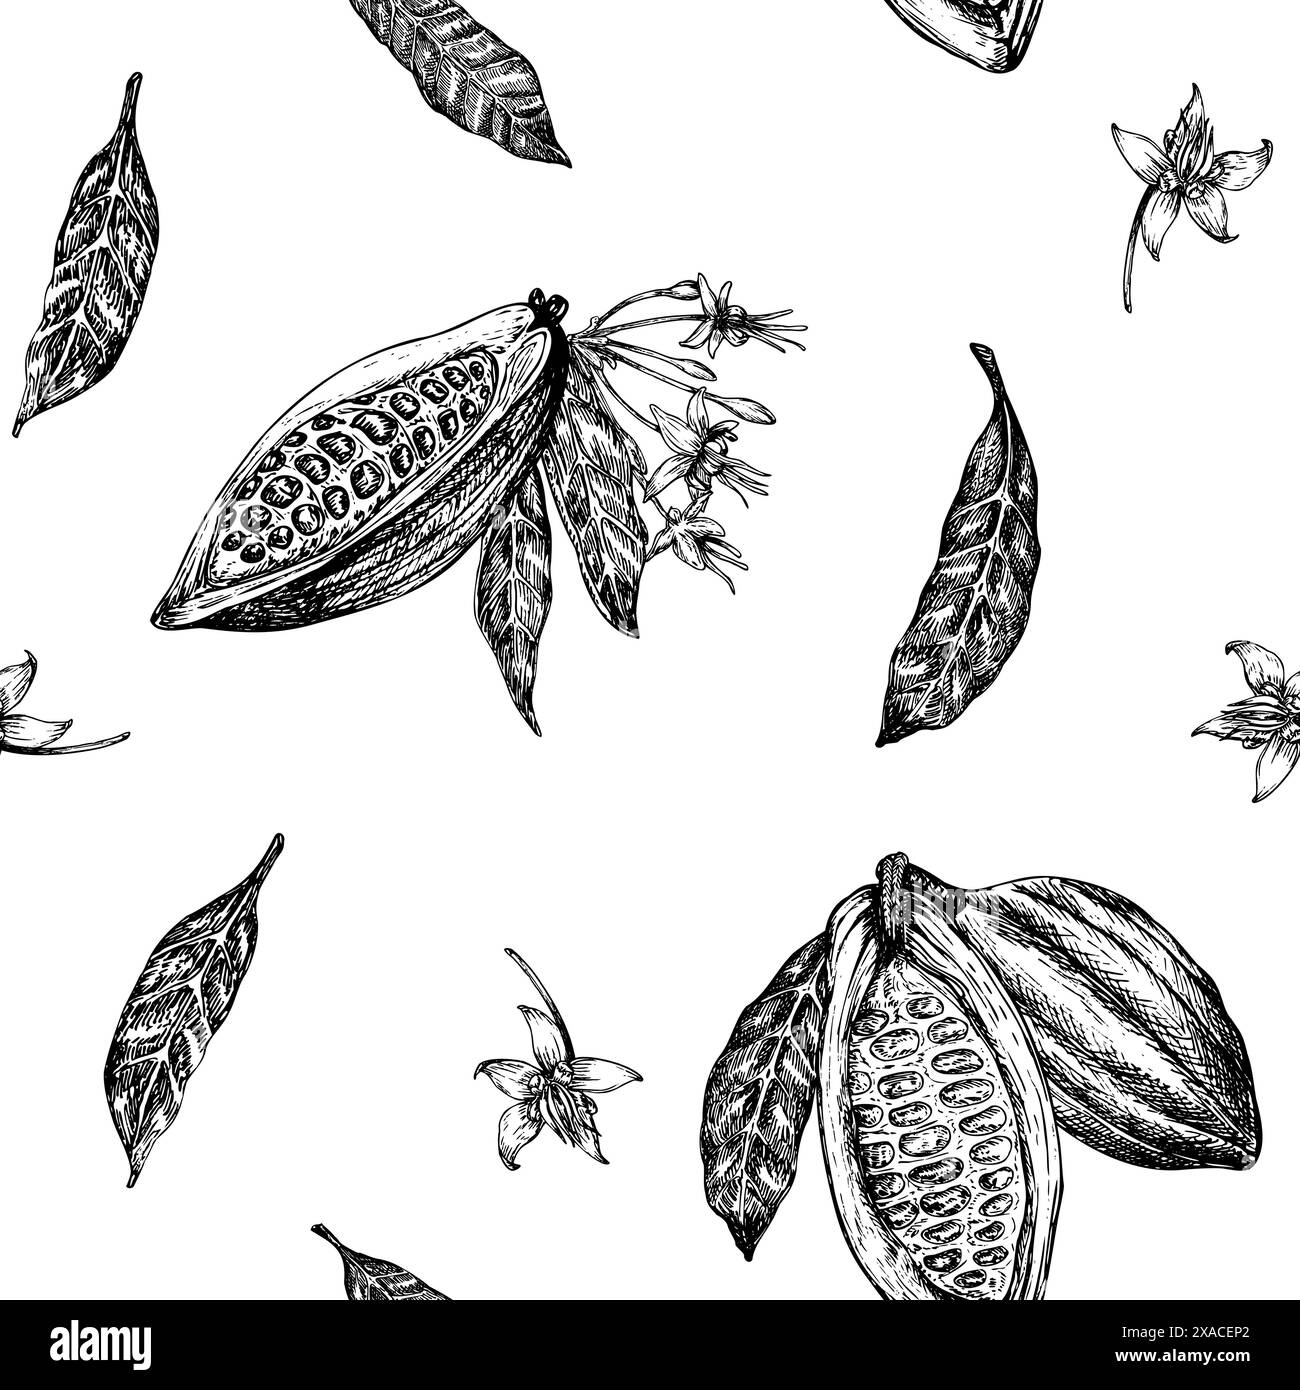 Seamless pattern with cocoa fruit graphic illustration, hand drawn sketch of vegetable, leaves, flowers. Botanical drawing of tropical fruit Stock Photo